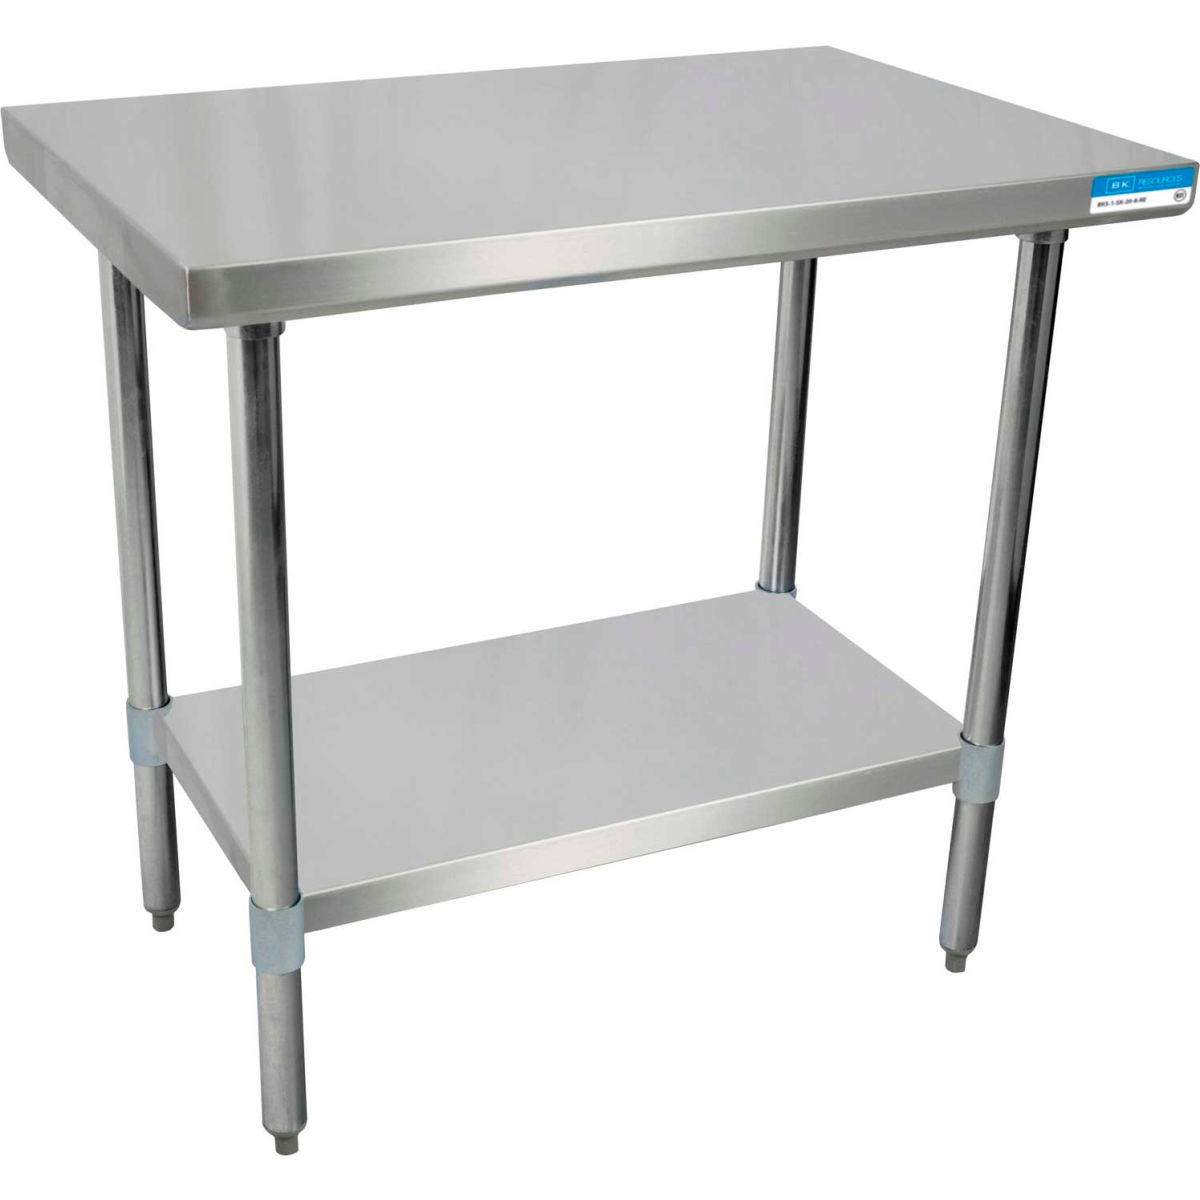 Picture of BK Resources B0899565 18 Gauge 430 Series Stainless Workbench with Undershelf - 72 x 30 in.